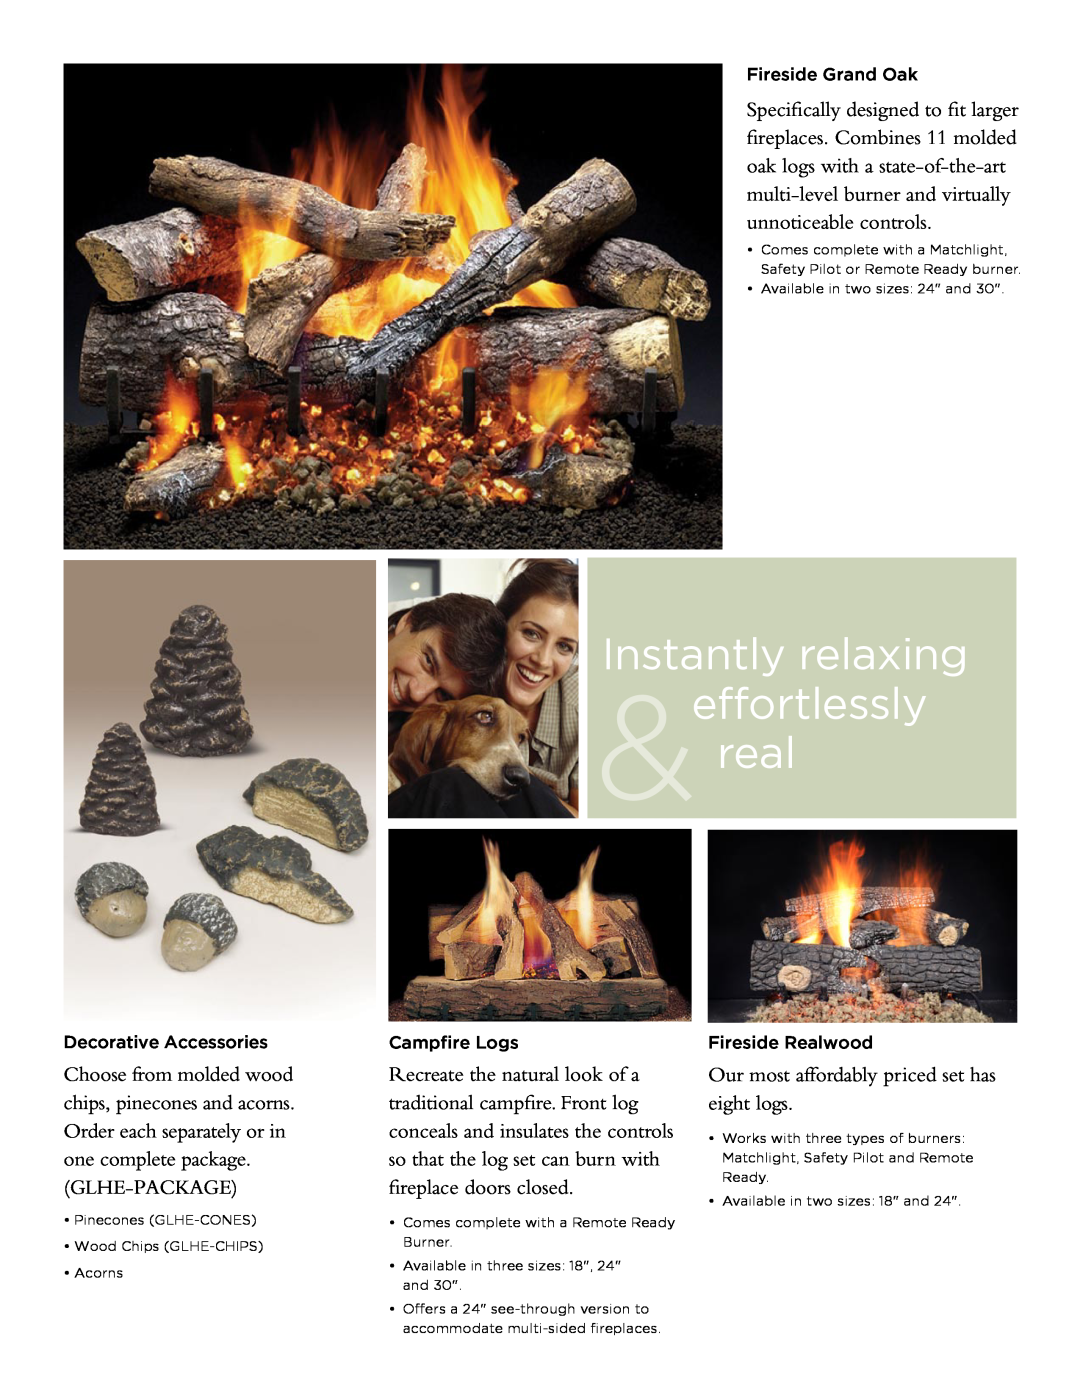 Hearth and Home Technologies Gas Logs manual Instantly relaxing &effortlessly real 